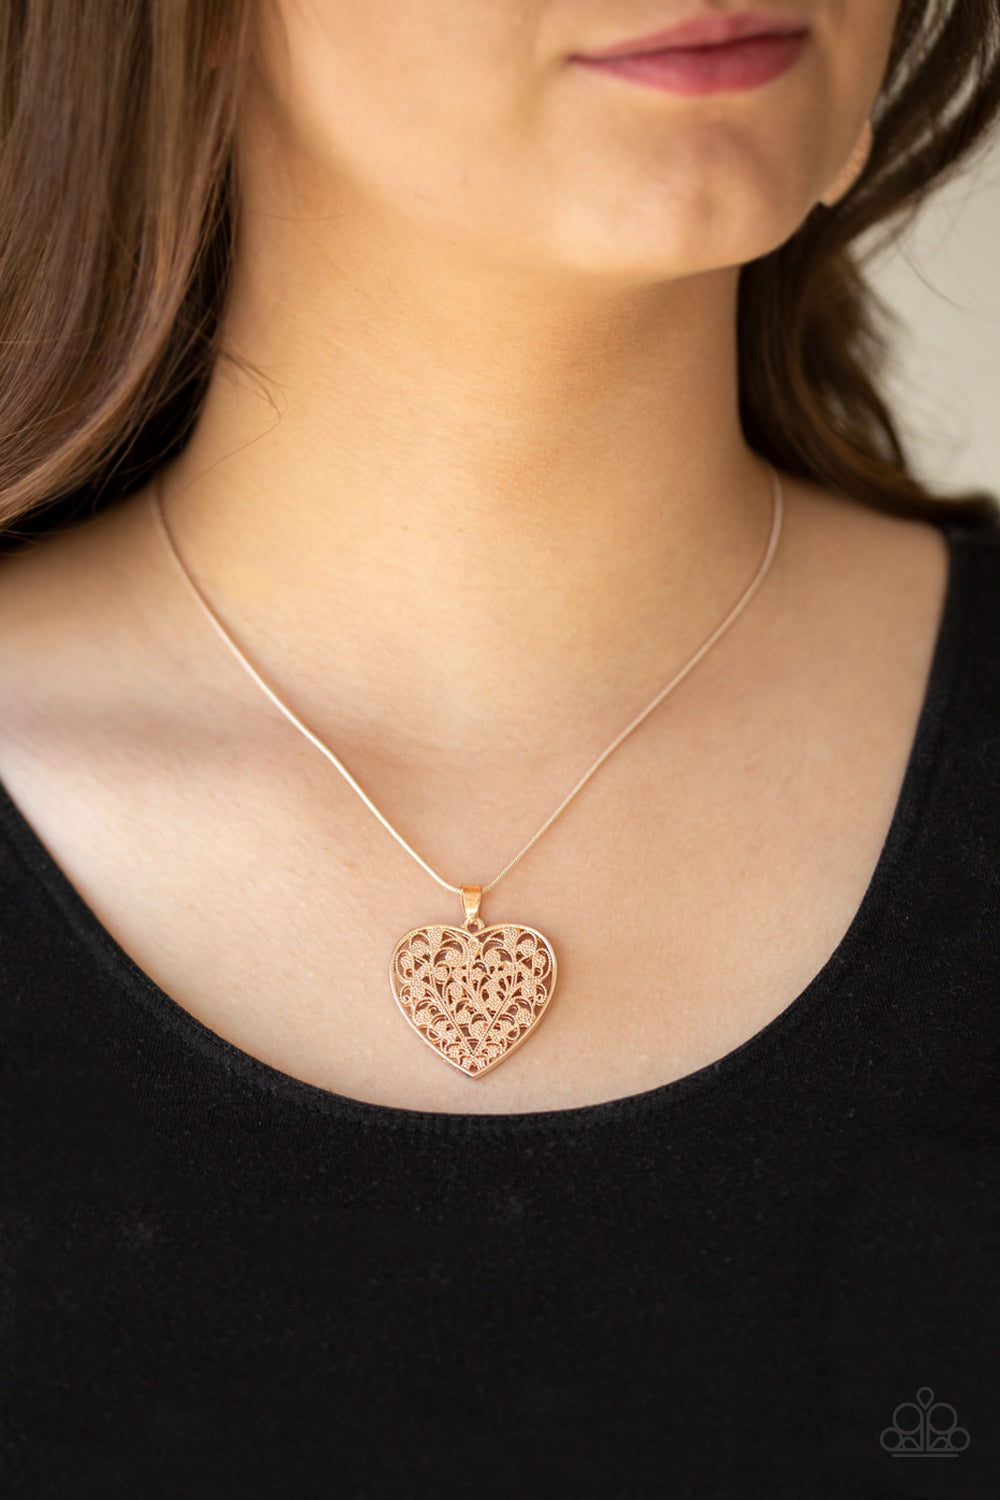 Paparazzi necklace - Look Into Your Heart - Rose Gold